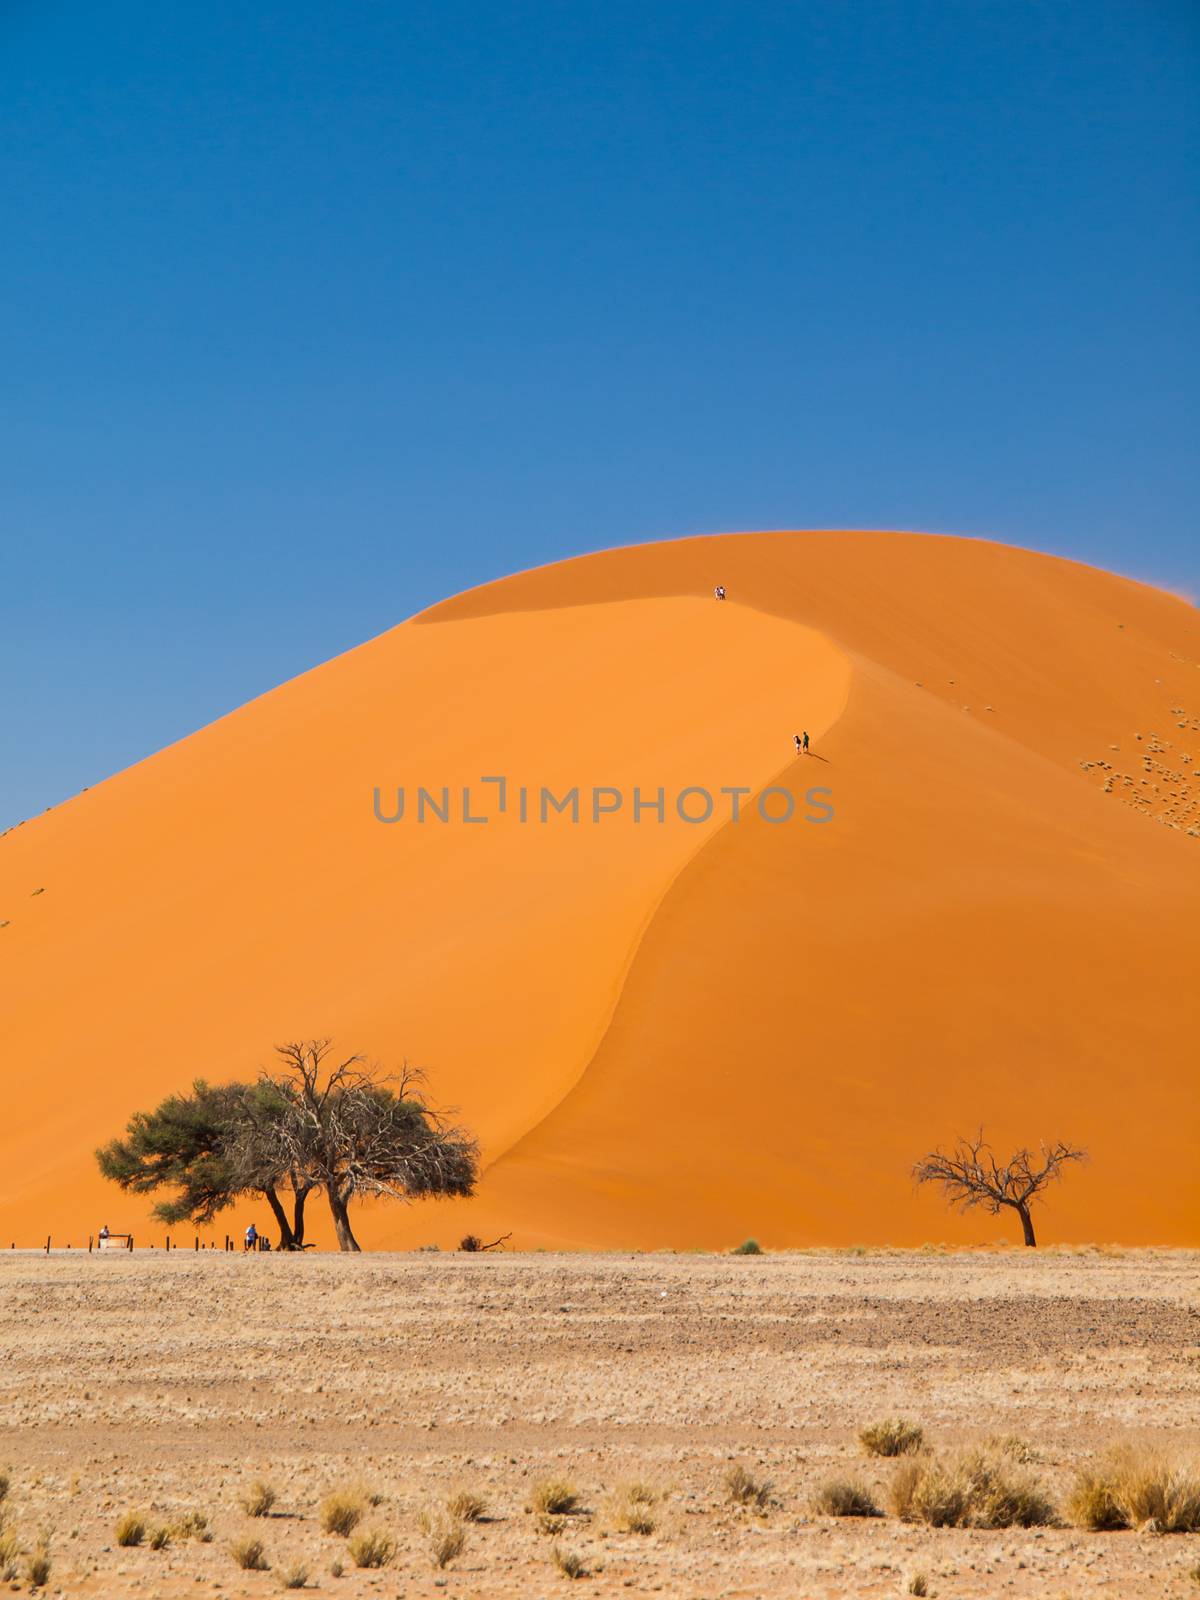 The most known dune of Namib desert - Dune 45 (Namibia)